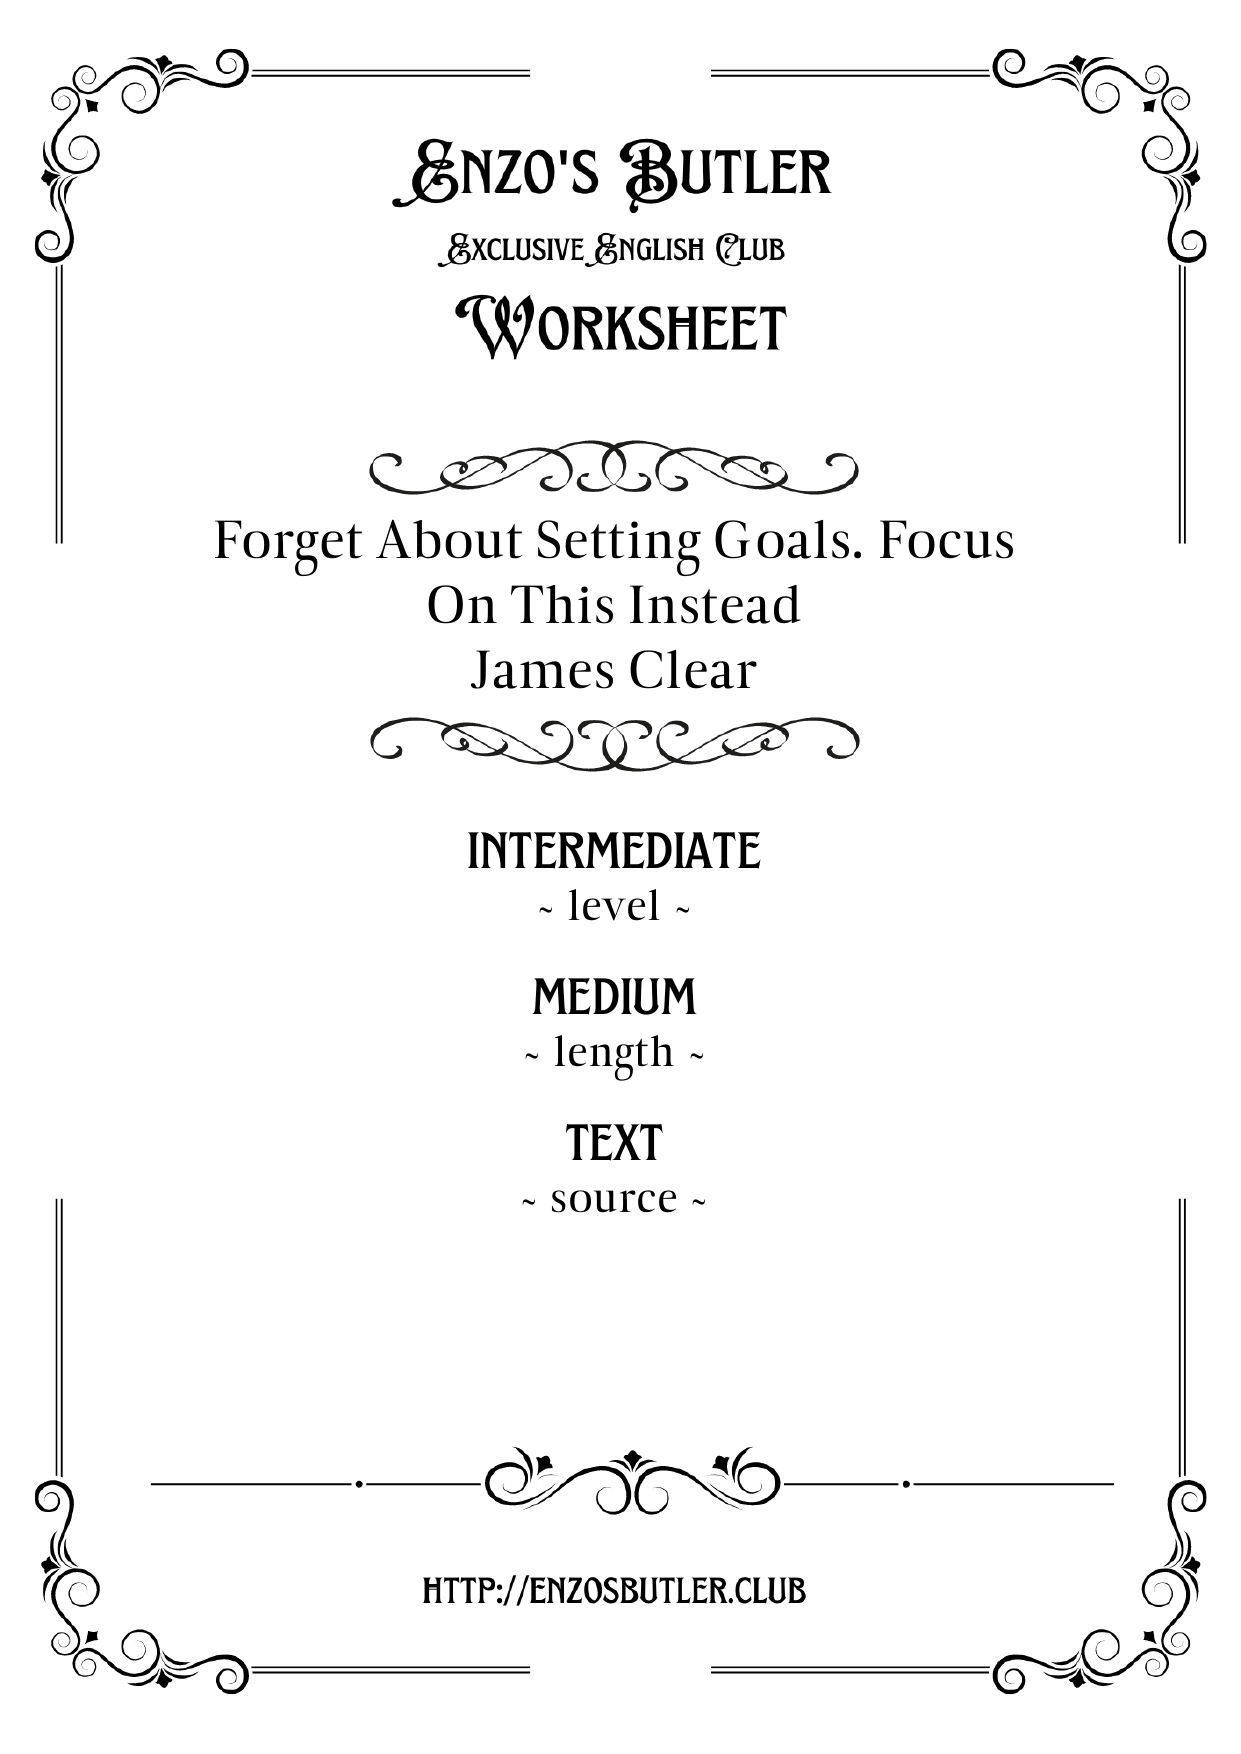 Forget About Setting Goals. Focus on This Instead by James Clear ~ English Worksheet